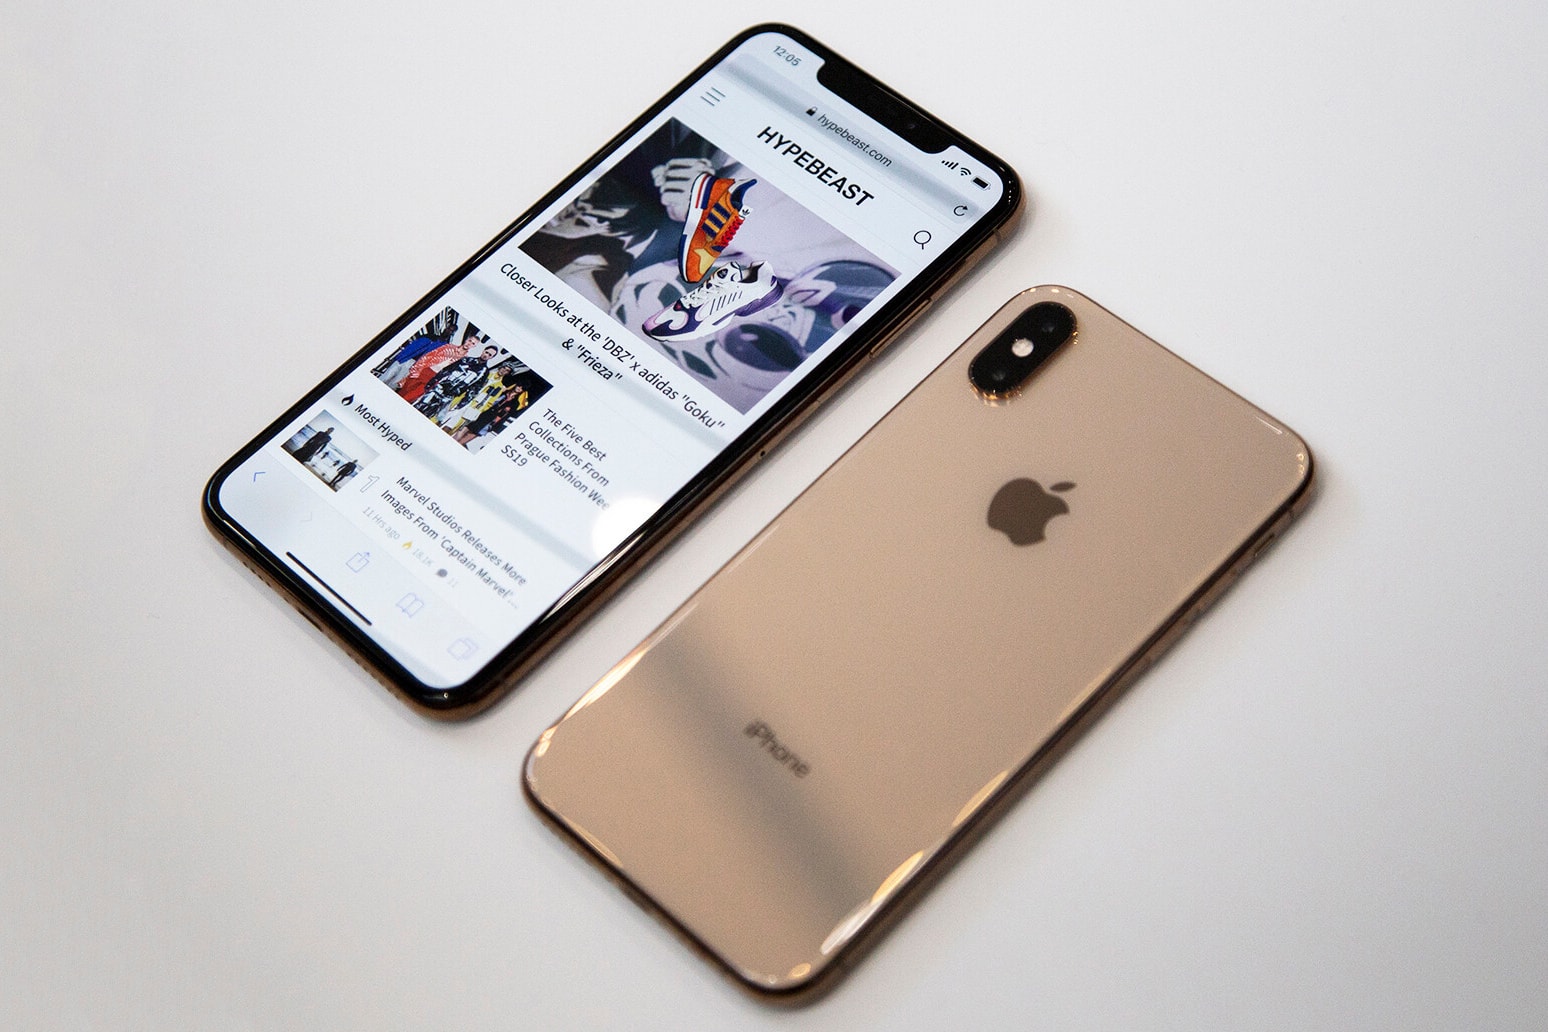 Apple Iphone New Model In 2018